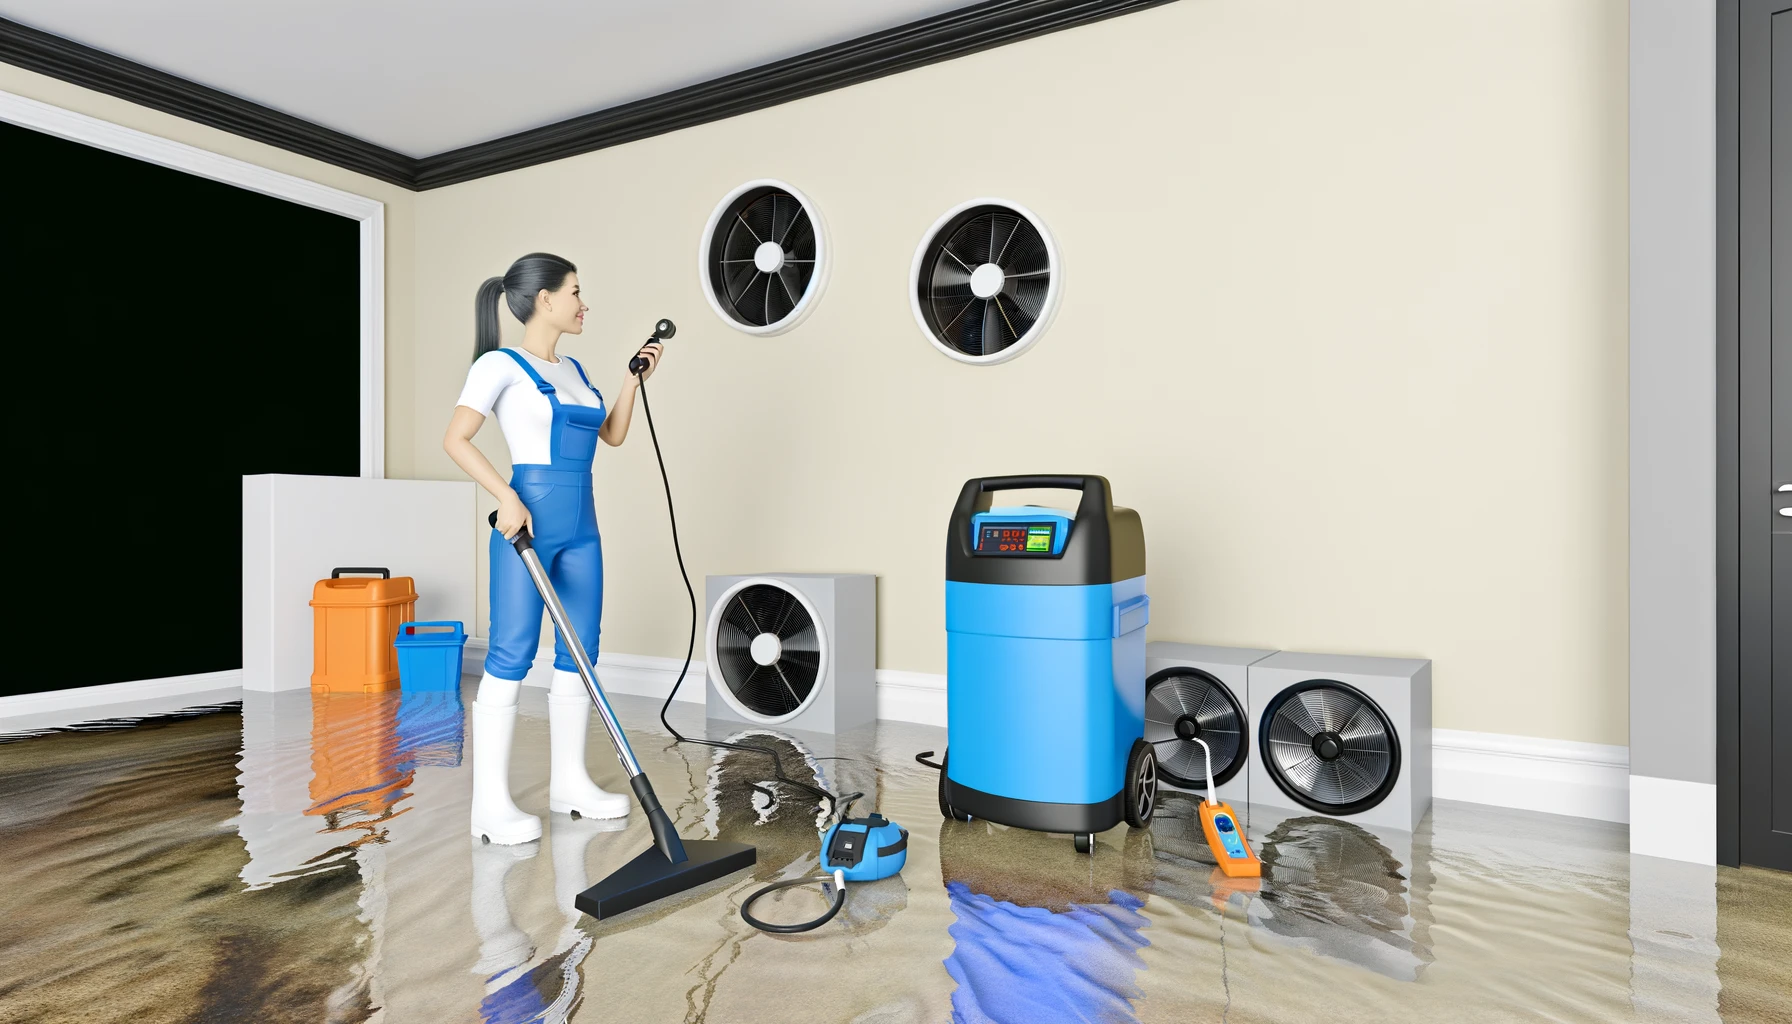 Fast drying prevents health risks and odors by stopping mold and mildew growth